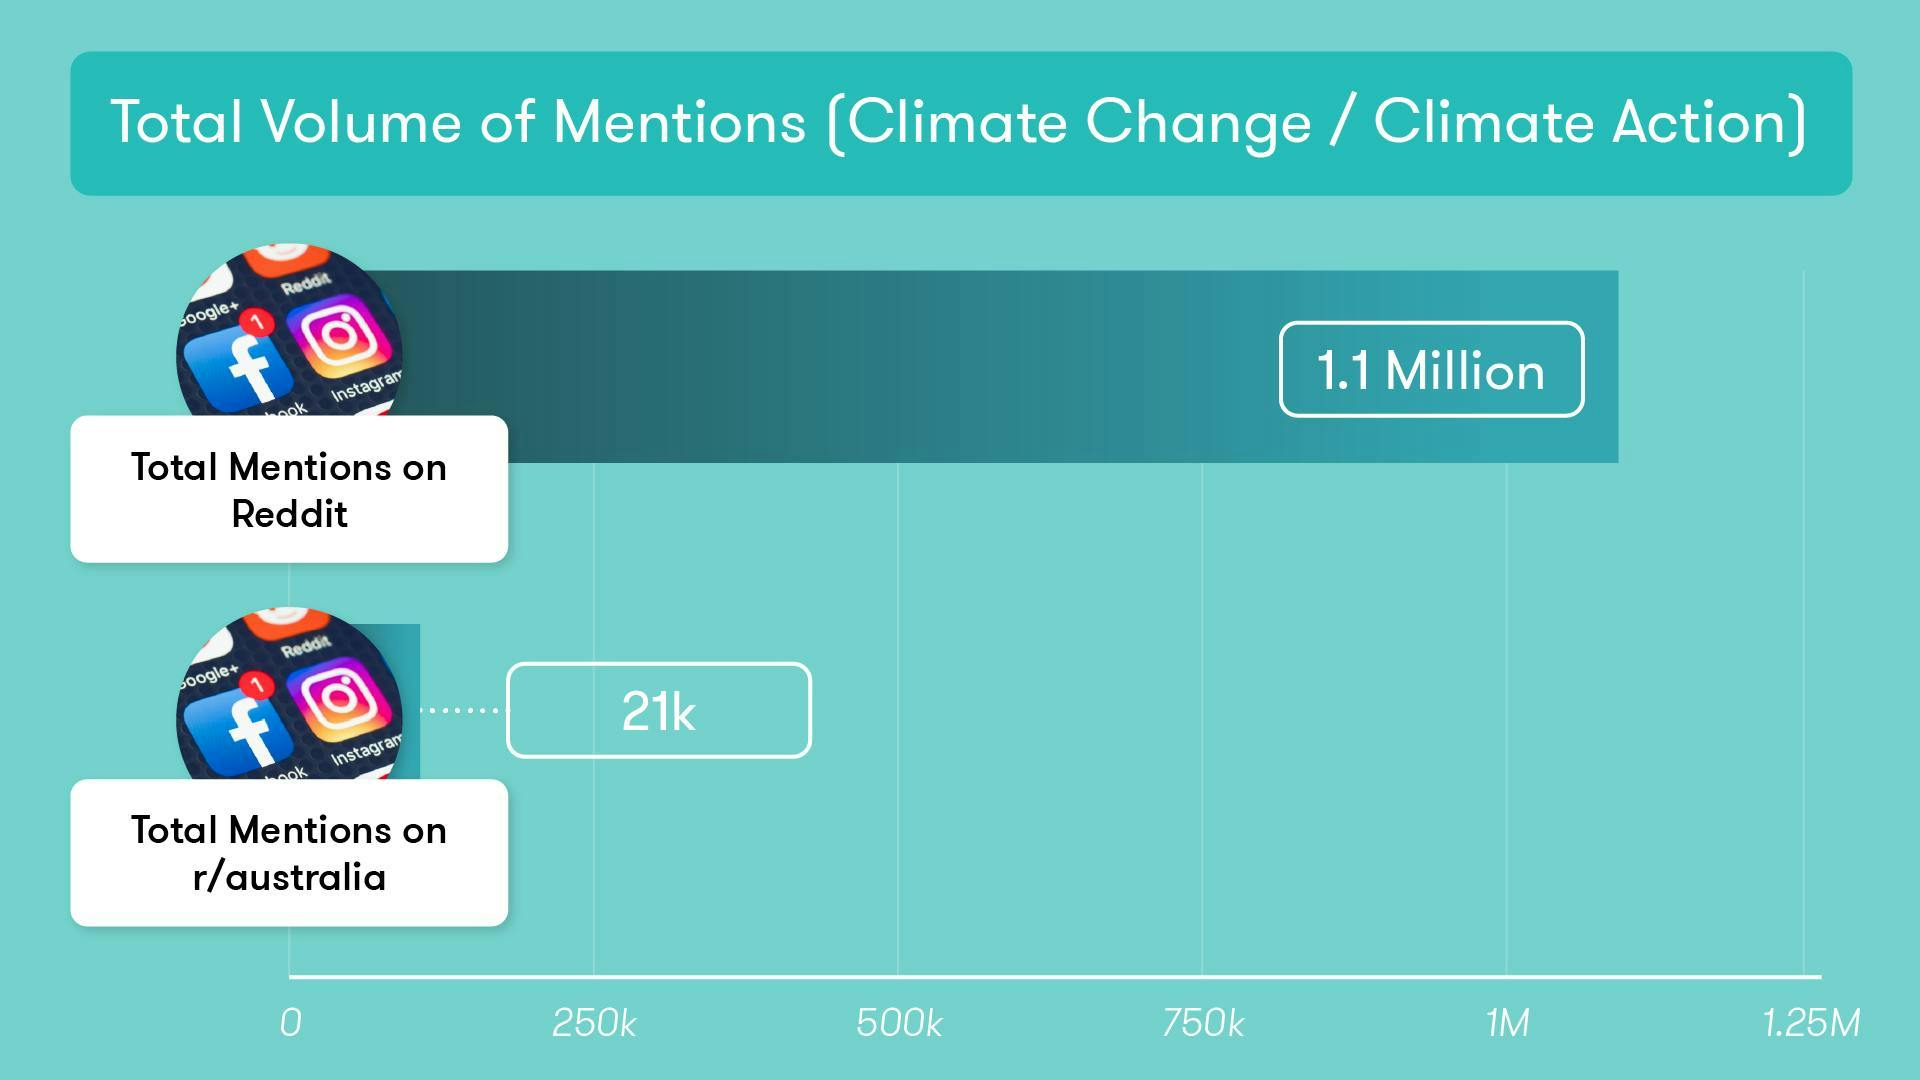 Climate action mentions on Reddit